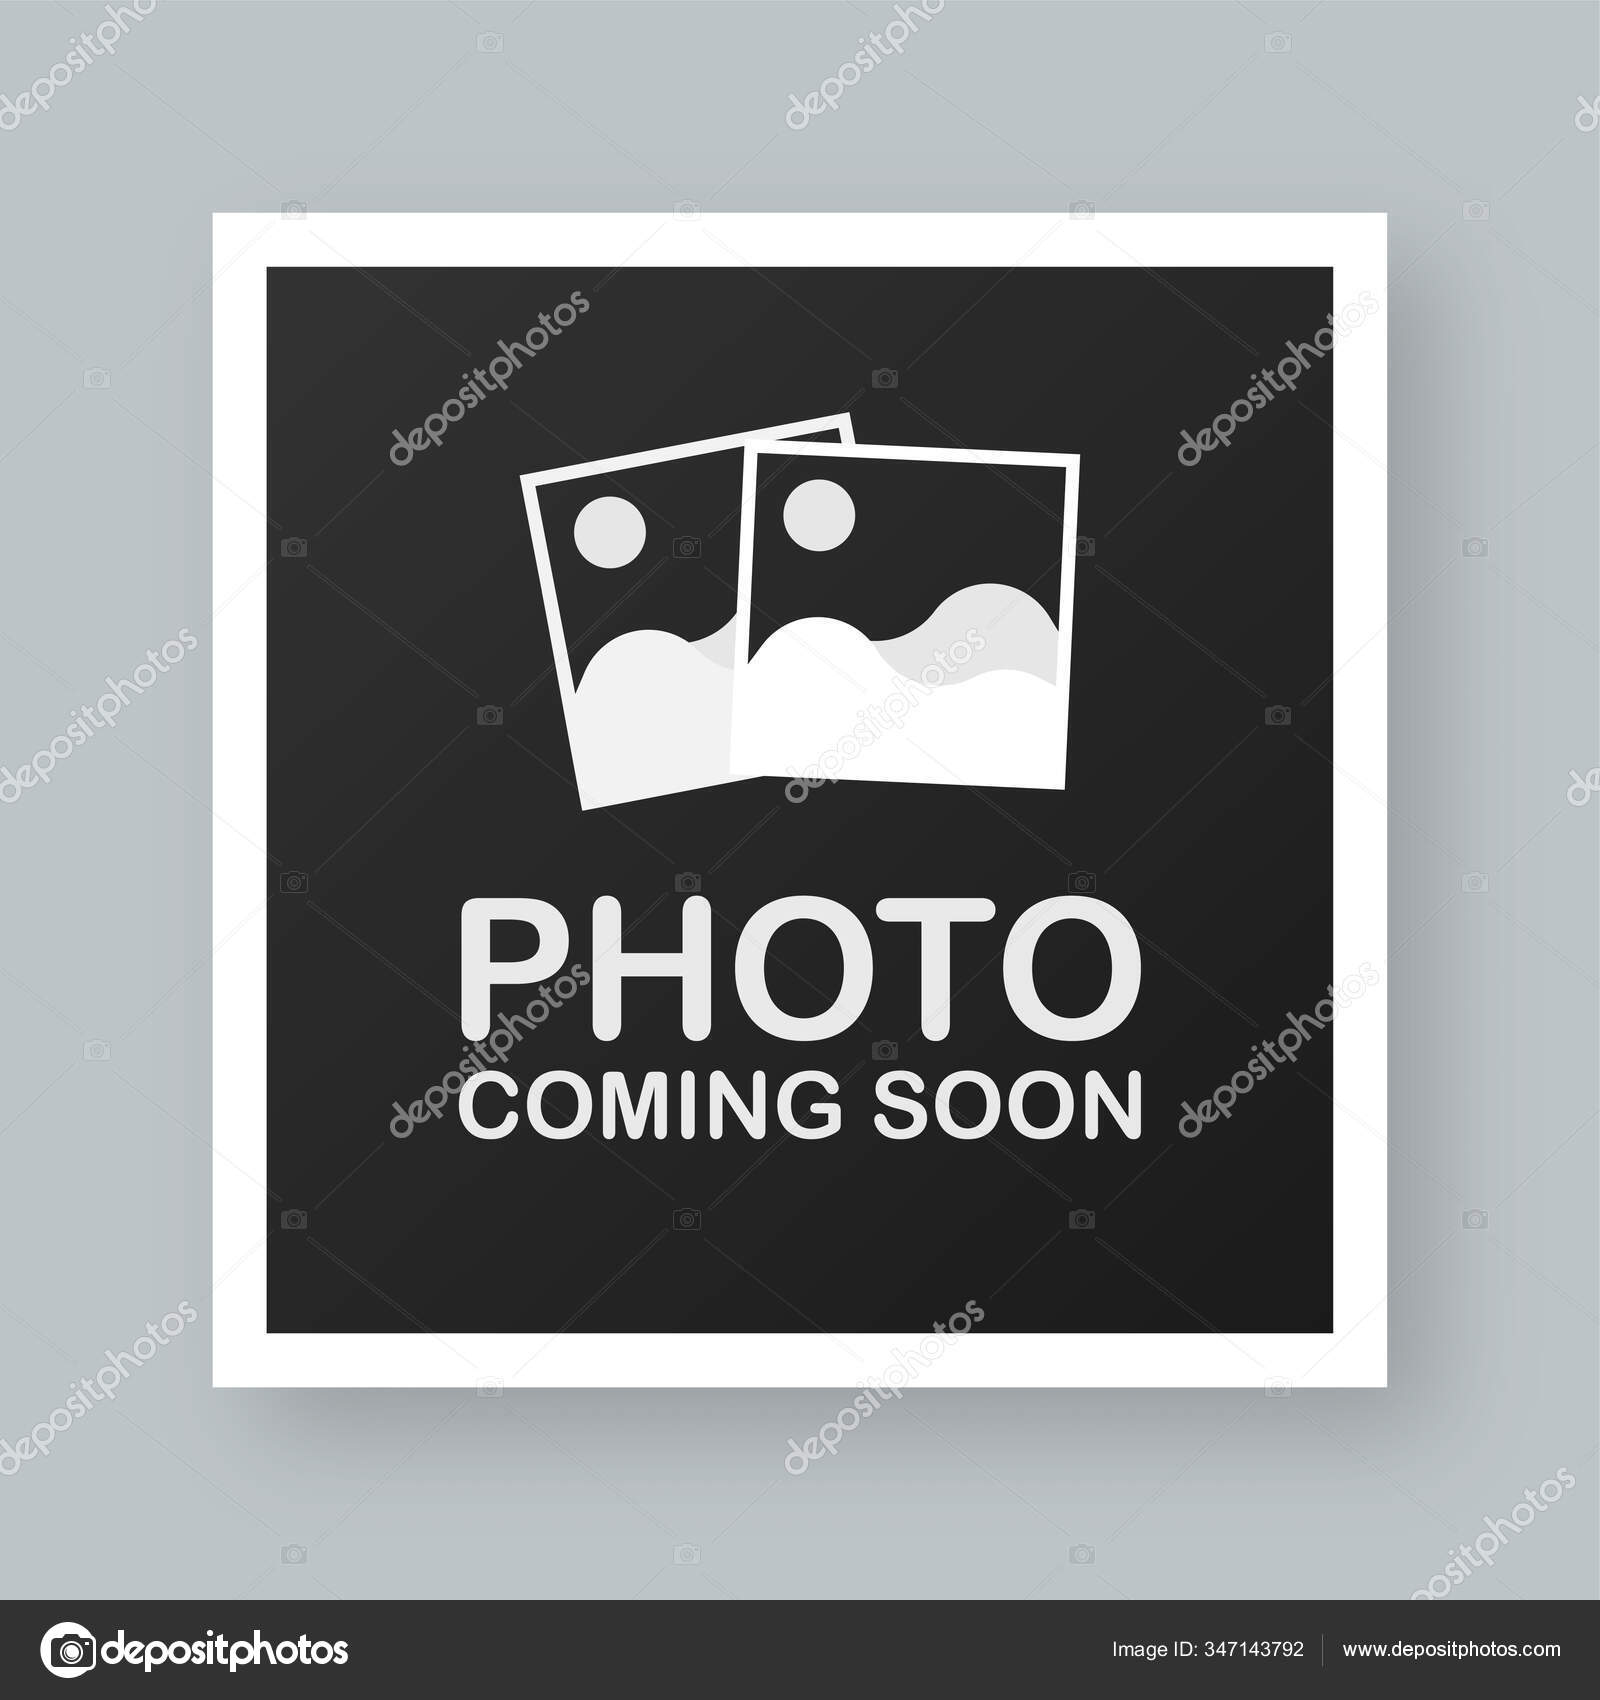 360 Image Coming Soon Vector Images Free Royalty Free Image Coming Soon Vectors Depositphotos